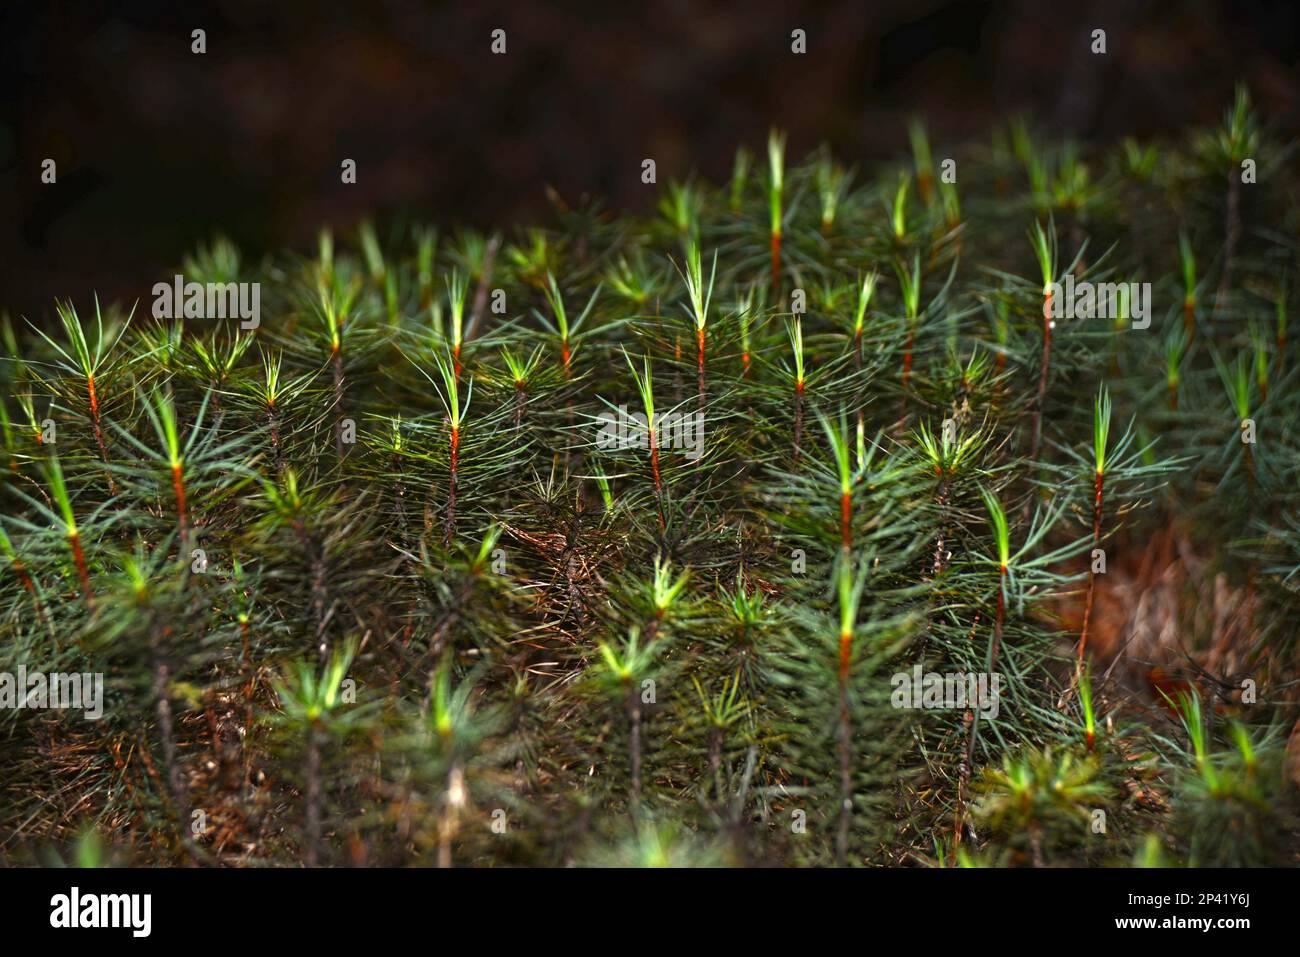 dawsonia-superba-tallest-moss-in-the-world-growing-near-lake-brunner-west-coast-new-zealand-the-moss-also-grows-in-australia-new-guinea-and-in-2P41Y6J.jpg